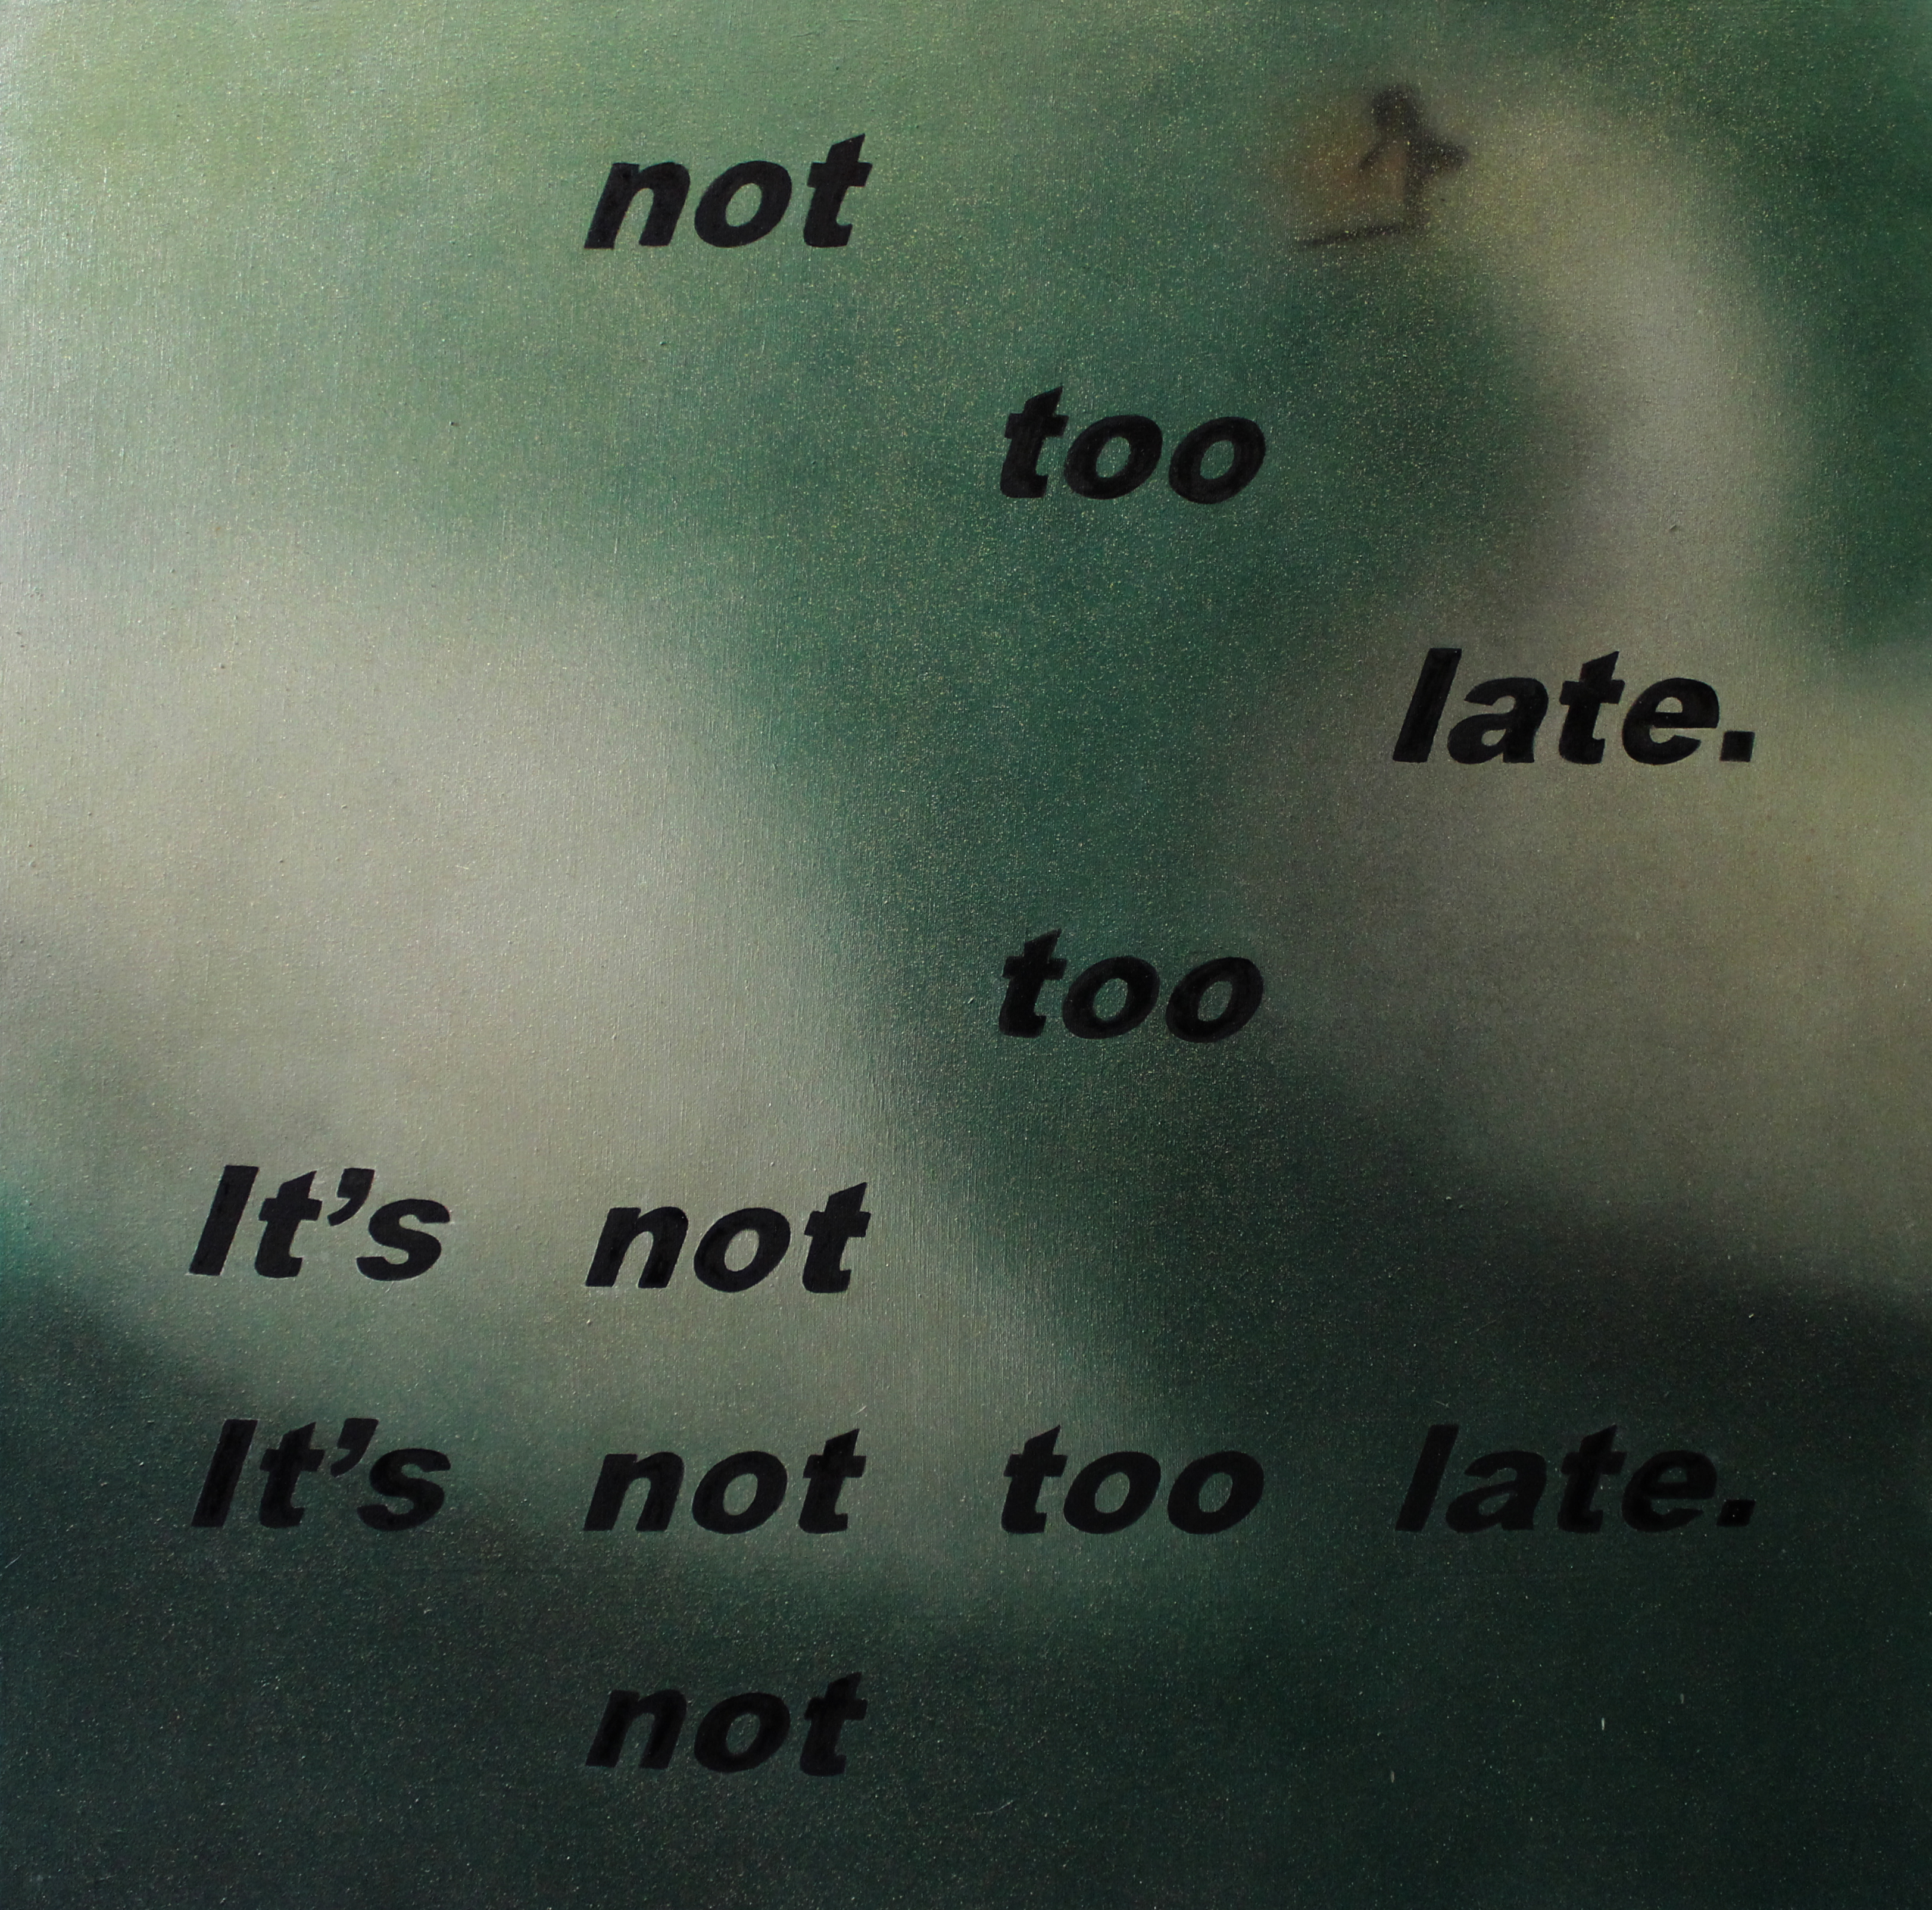 It's never late.